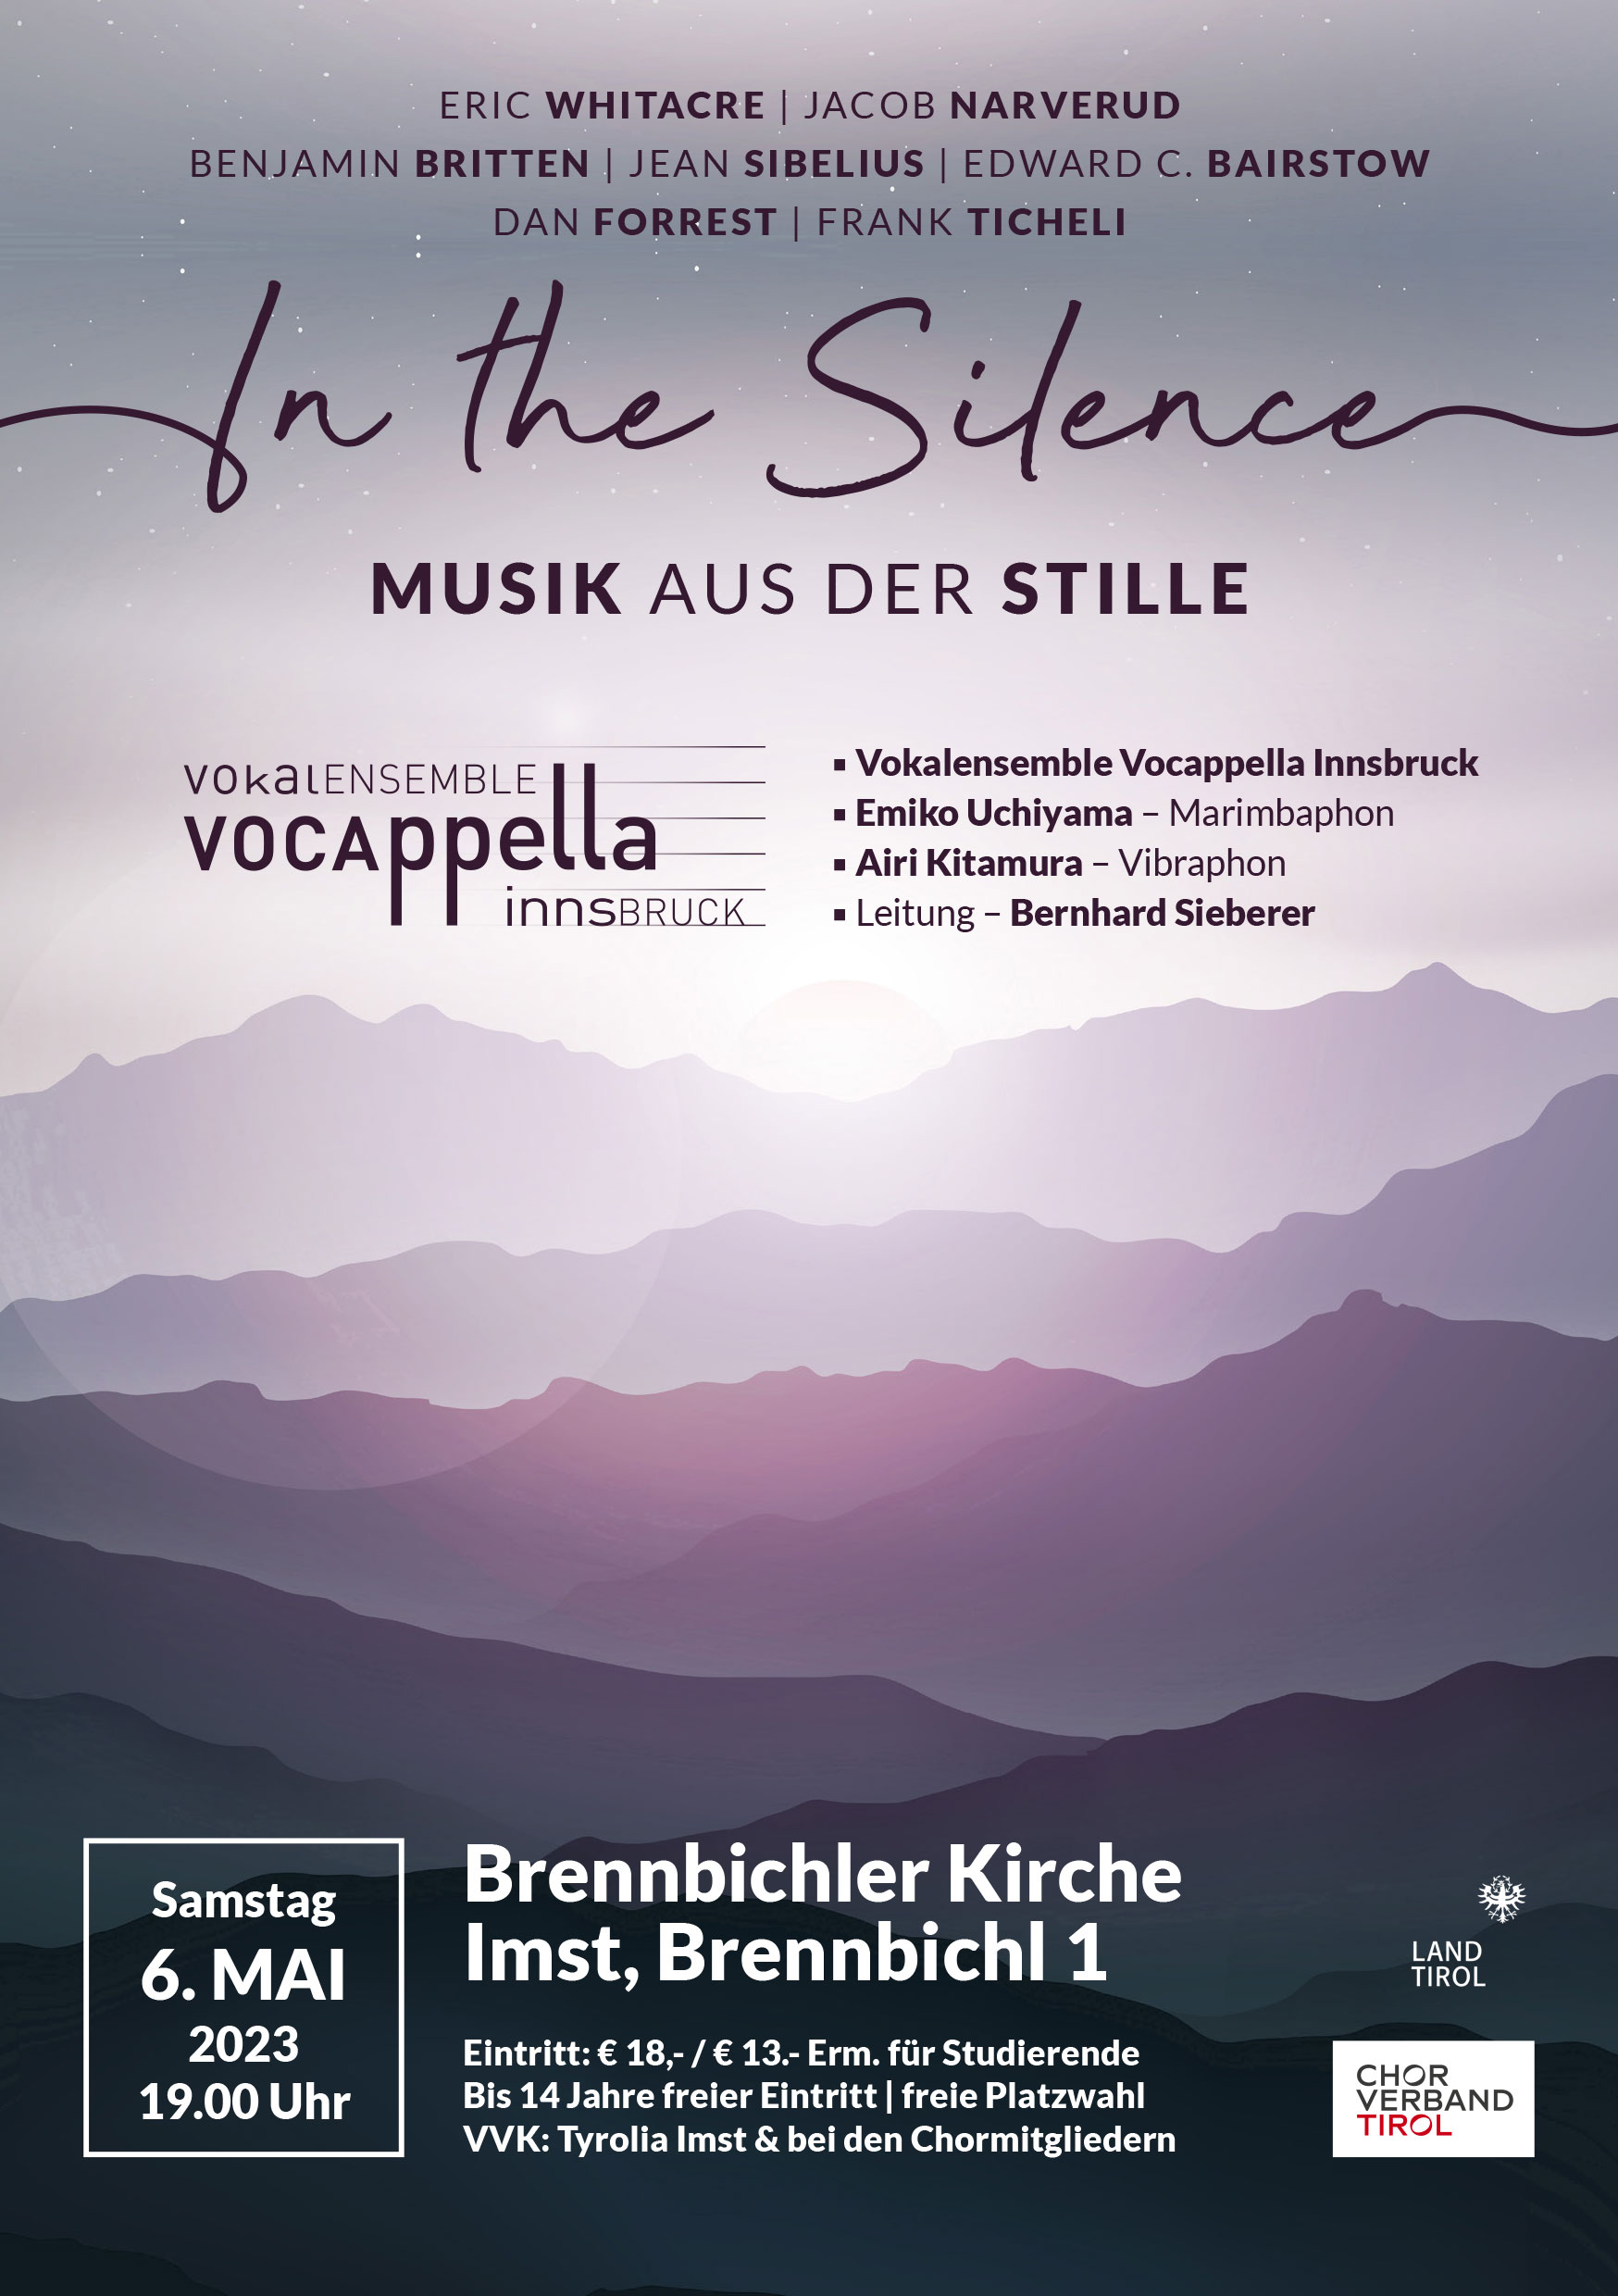 In the silence - Imst